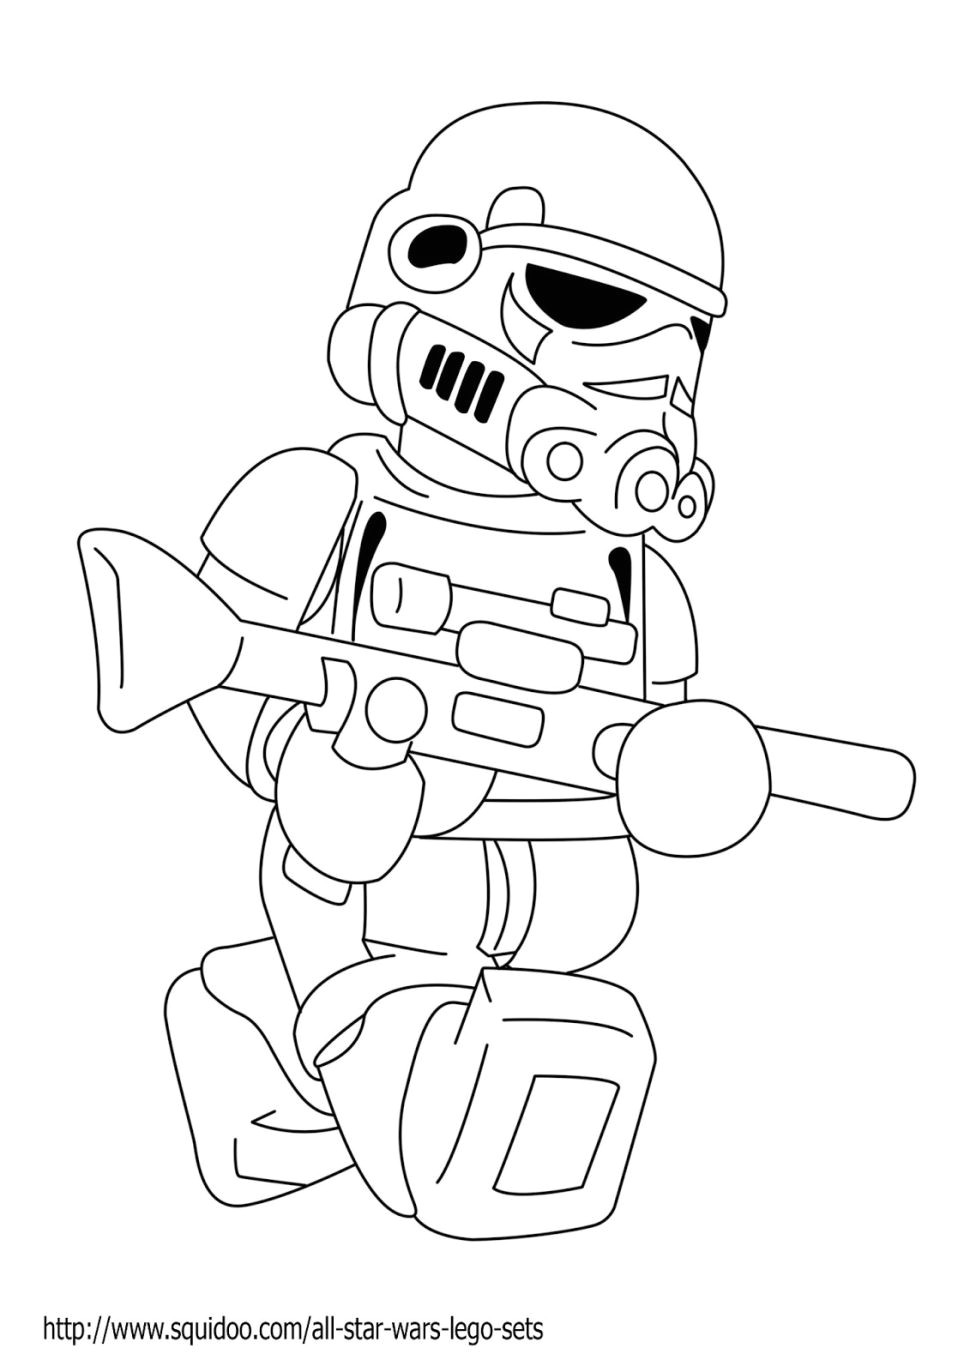 Coloriage Lego Star Wars Dark Vador Coloring Pages Up to Date Darth Vader Coloring Pages Beautiful